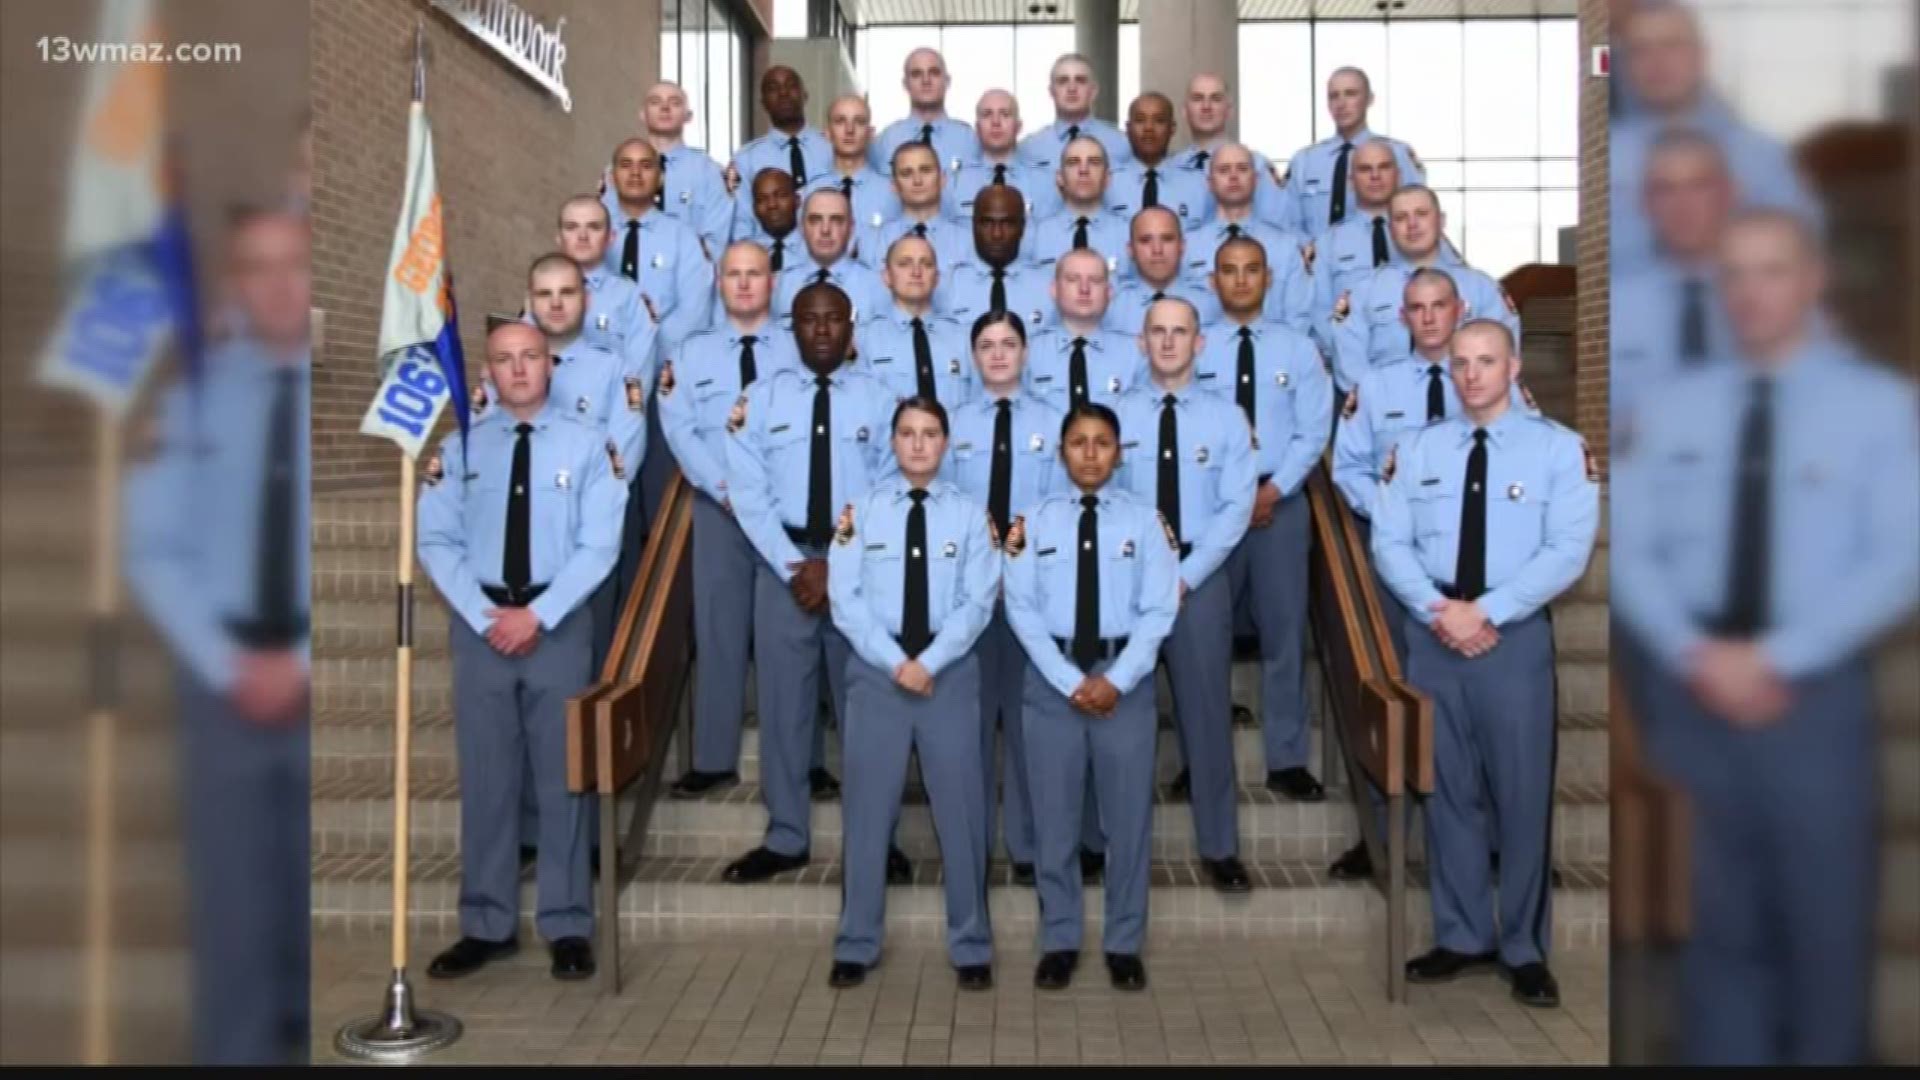 A cheating scandal wiped out the entire Georgia State Patrol Trooper Class of 2019. The GSP Commander said he fired more than 2 dozen troopers who were involved.